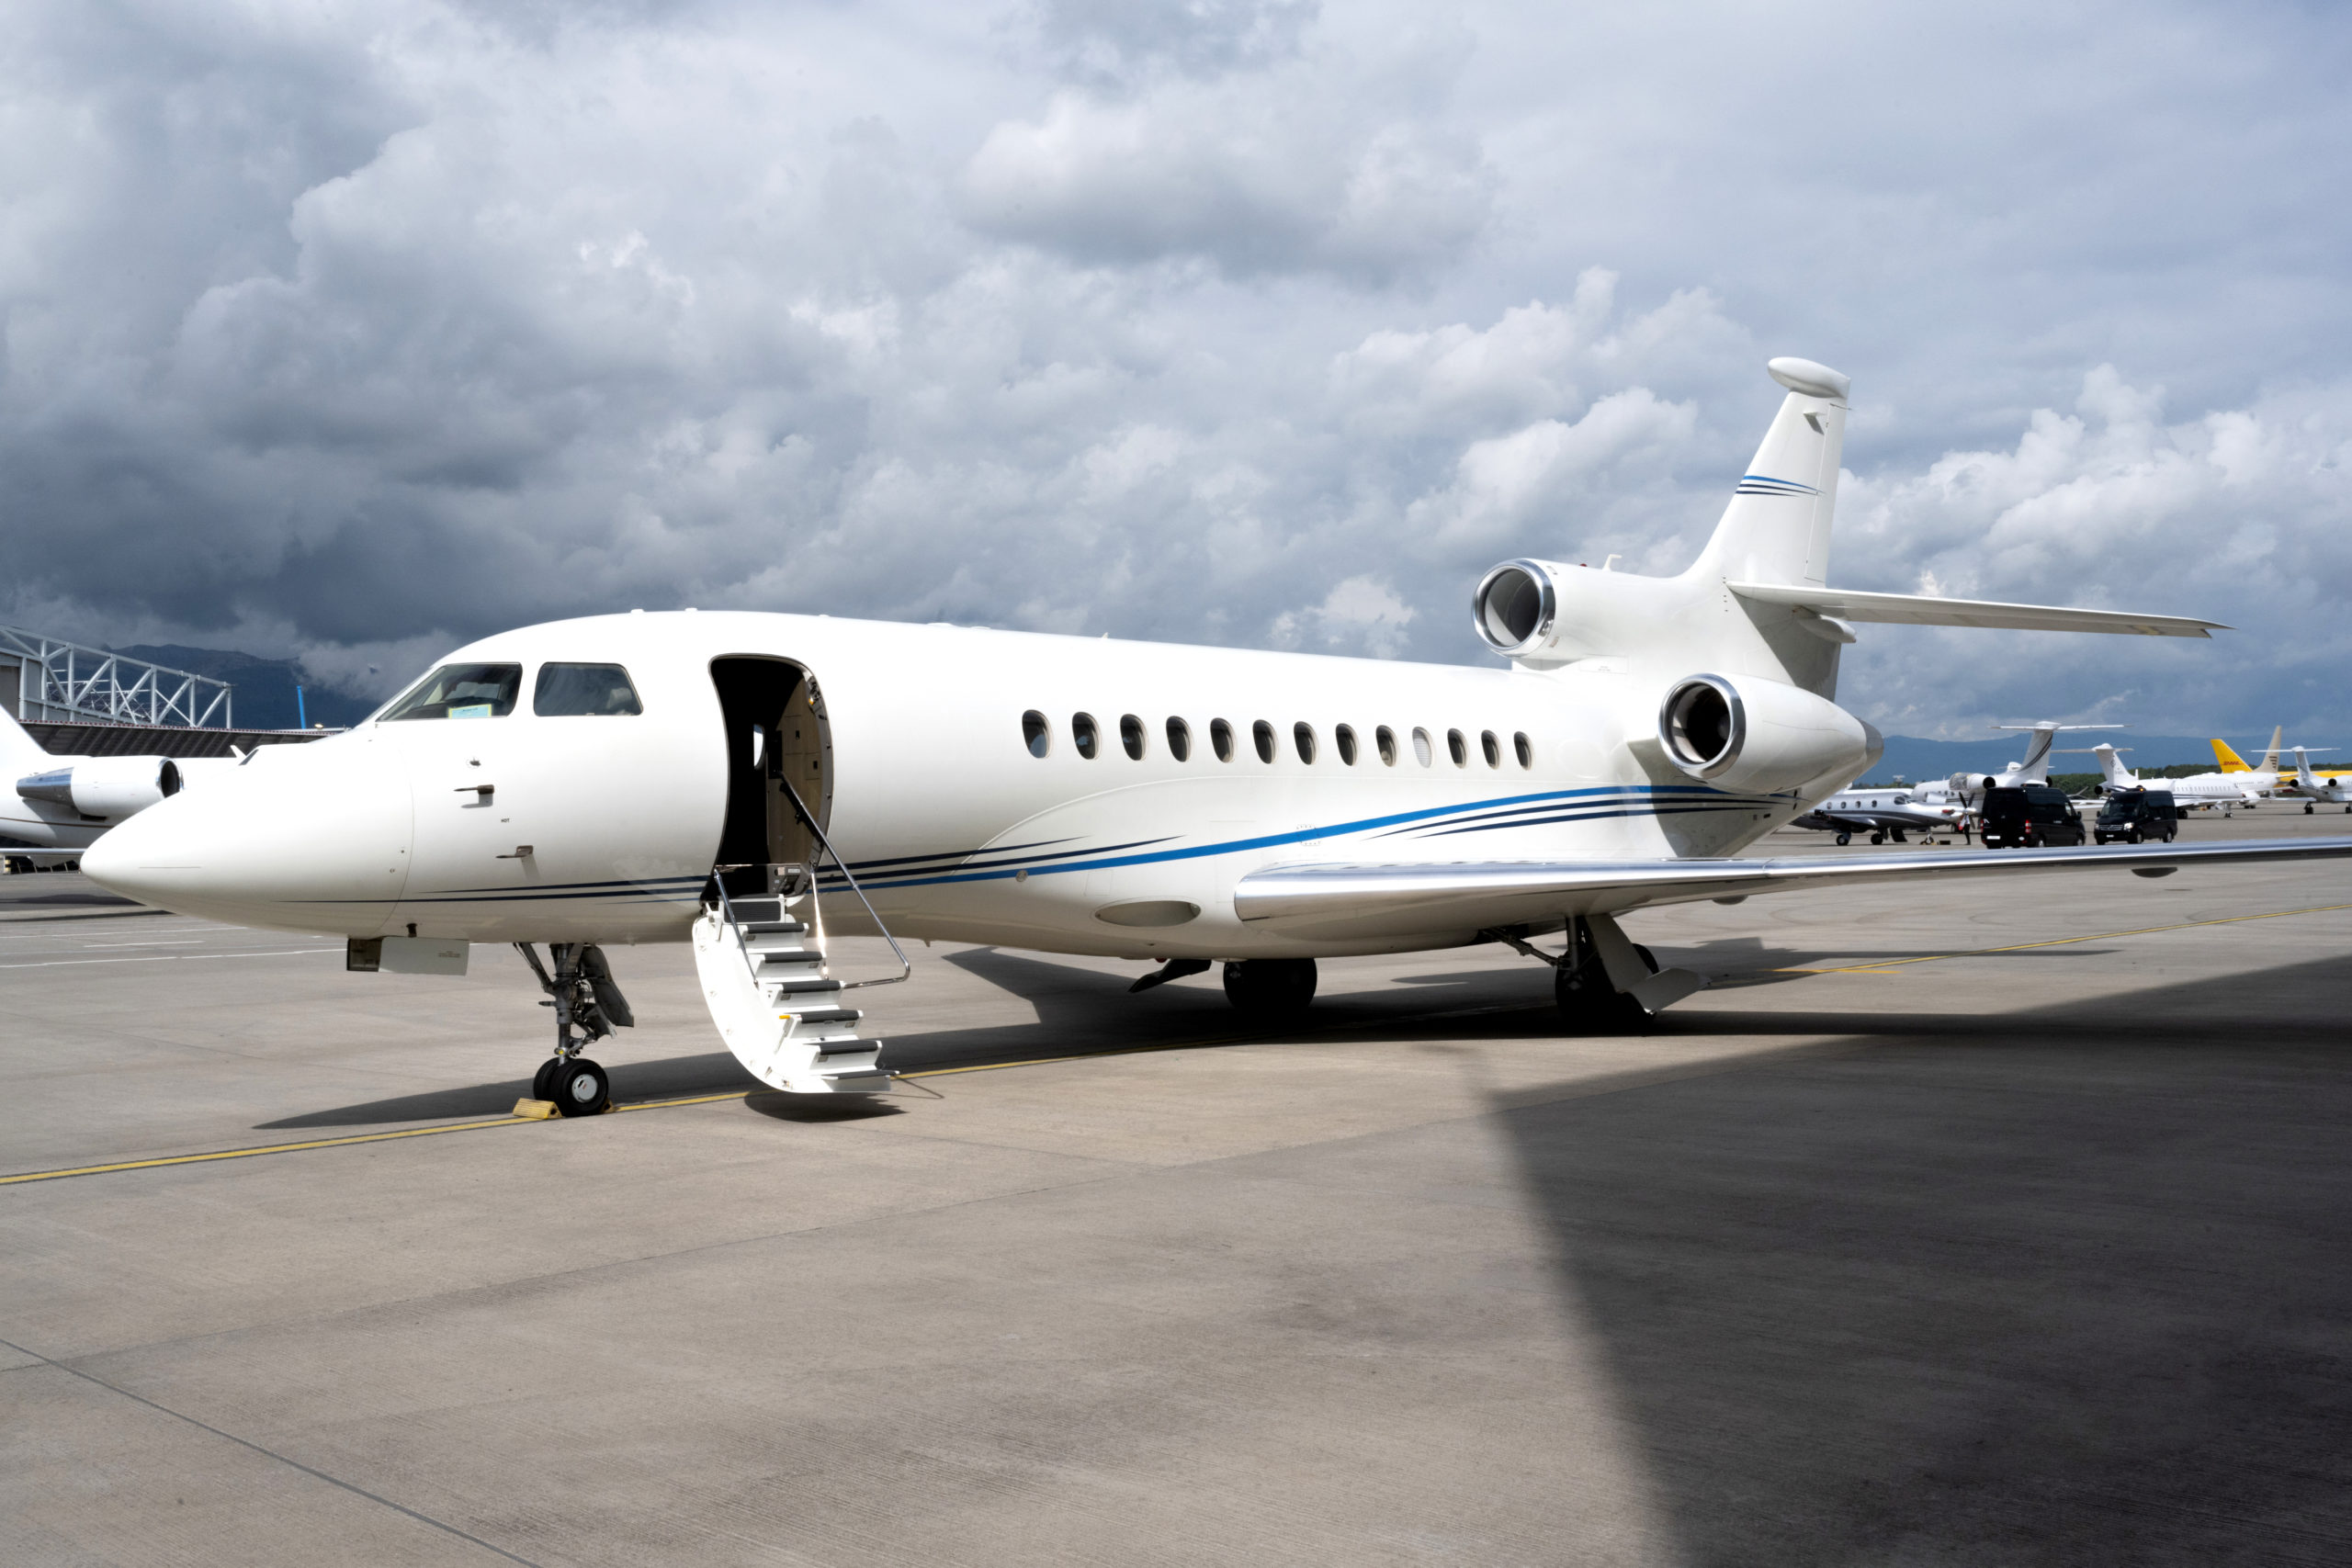 Dassault Falcon 7X - OE-LZM - Aircraft for sale - SPARFELL Inventory